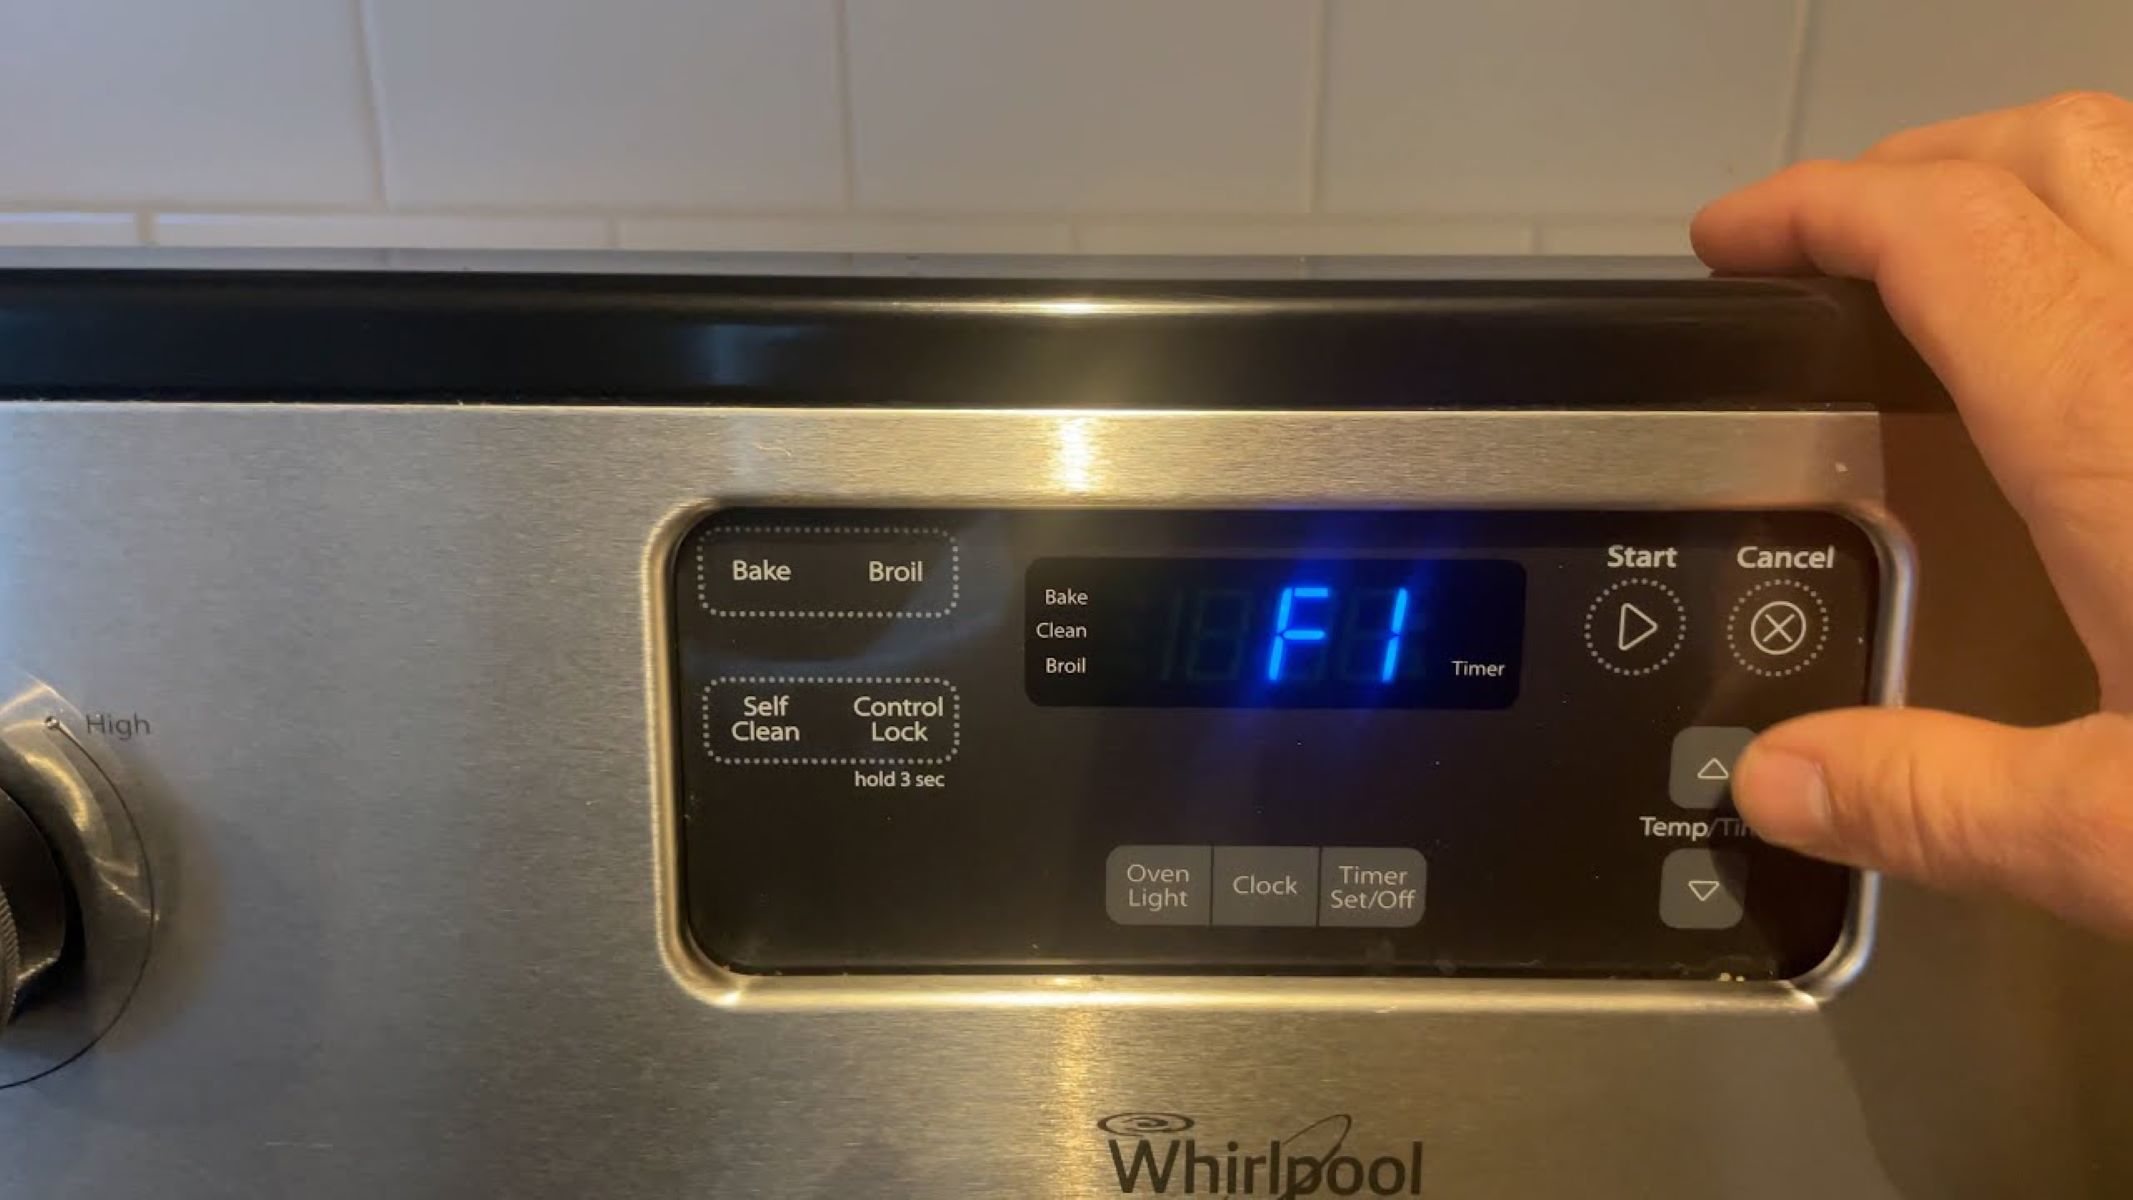 How To Fix The Error Code F1 For Whirlpool Oven & Range